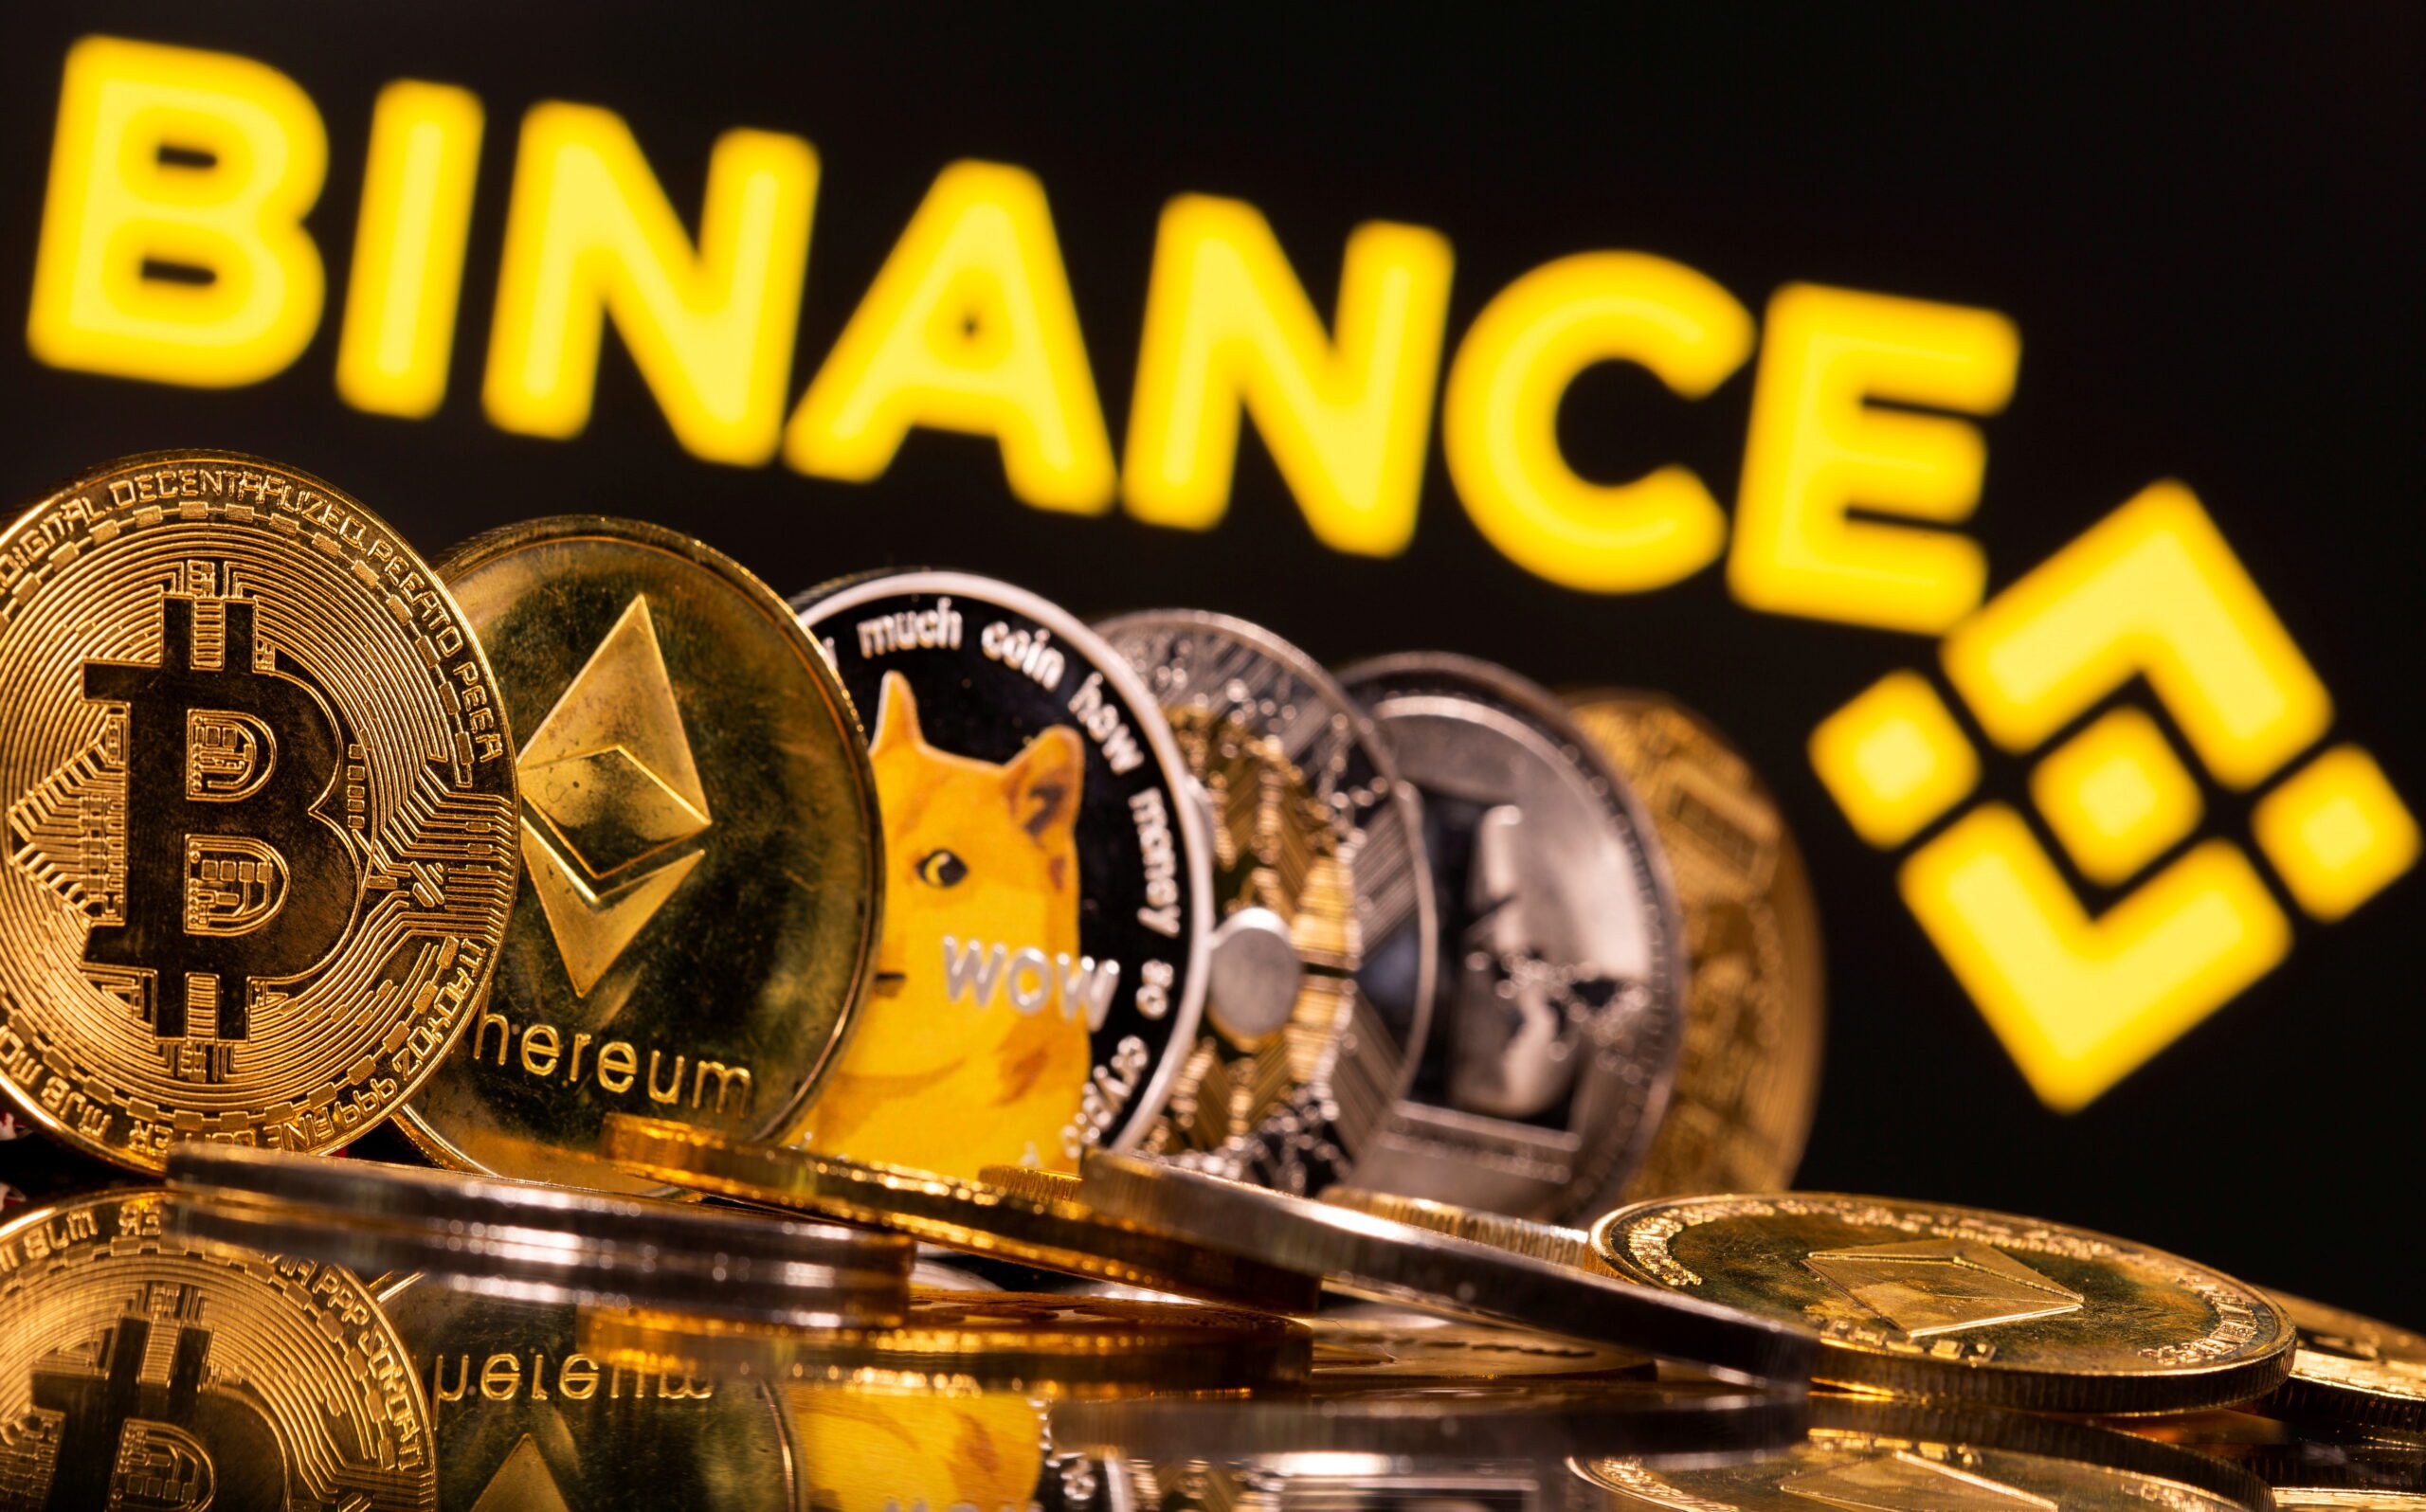 Binance Operations in France Leaves Regulators Controversial